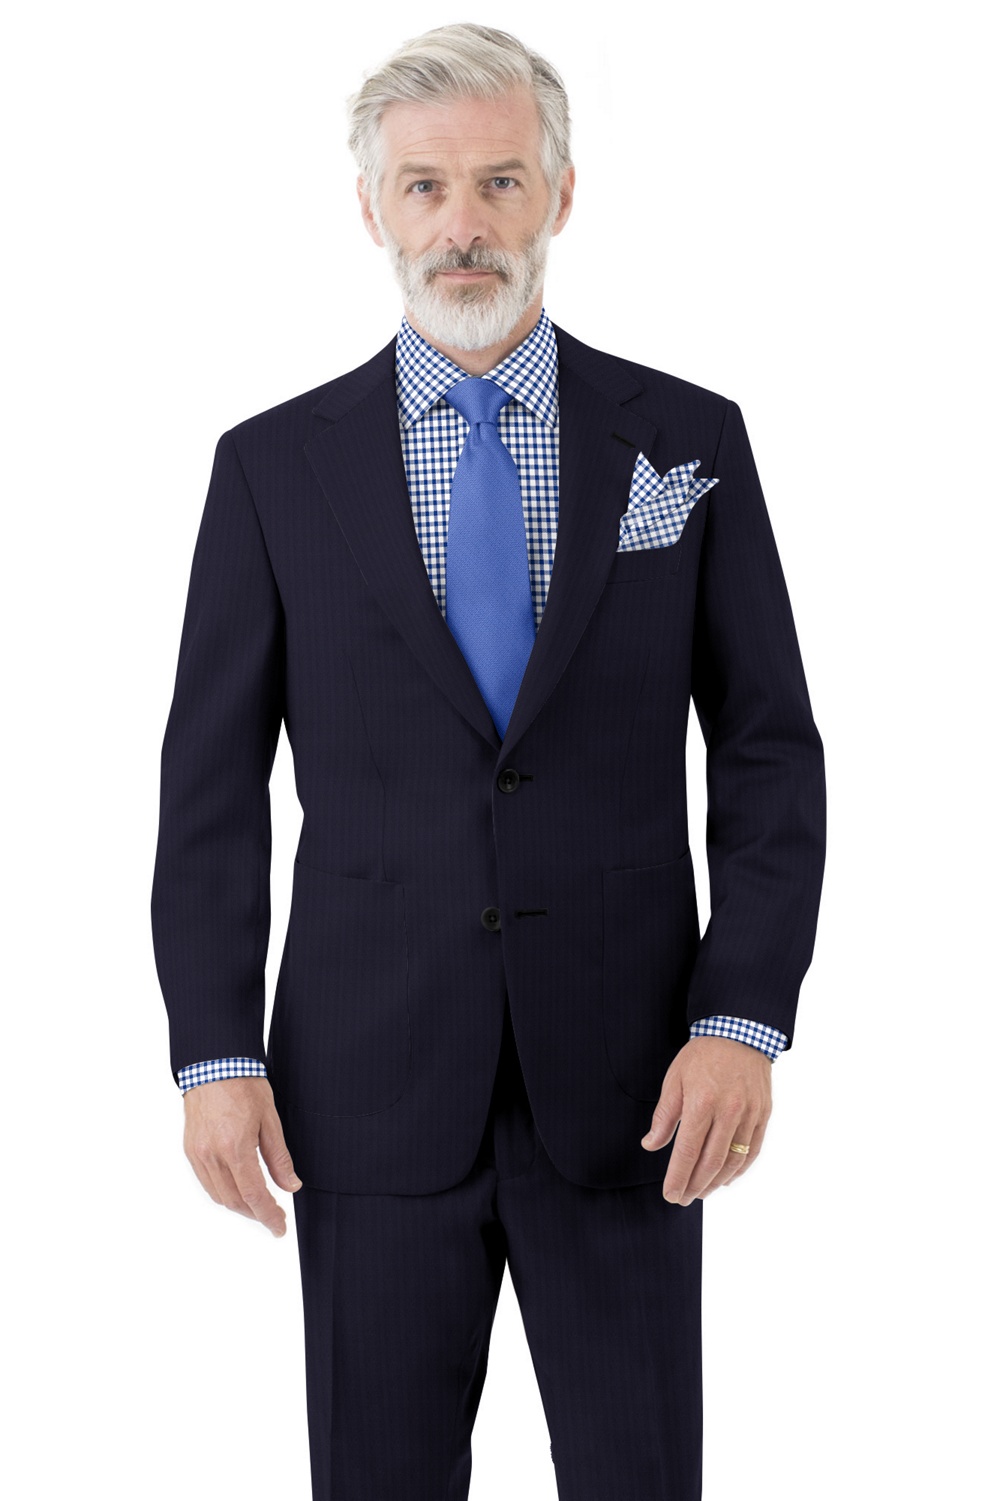 $995 EMBARK 2 SUITS MADE-to-MEASURE